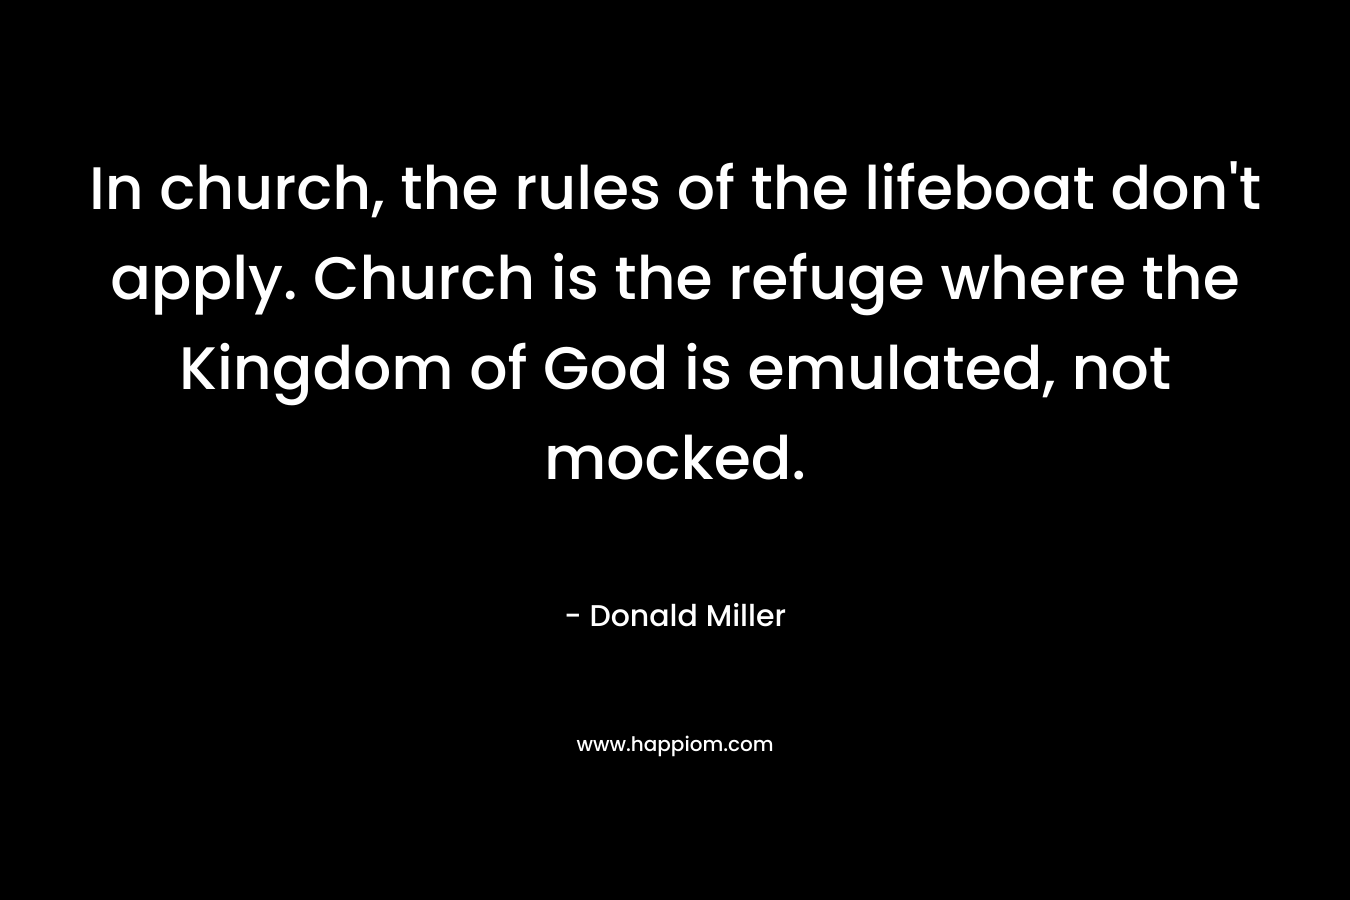 In church, the rules of the lifeboat don't apply. Church is the refuge where the Kingdom of God is emulated, not mocked.